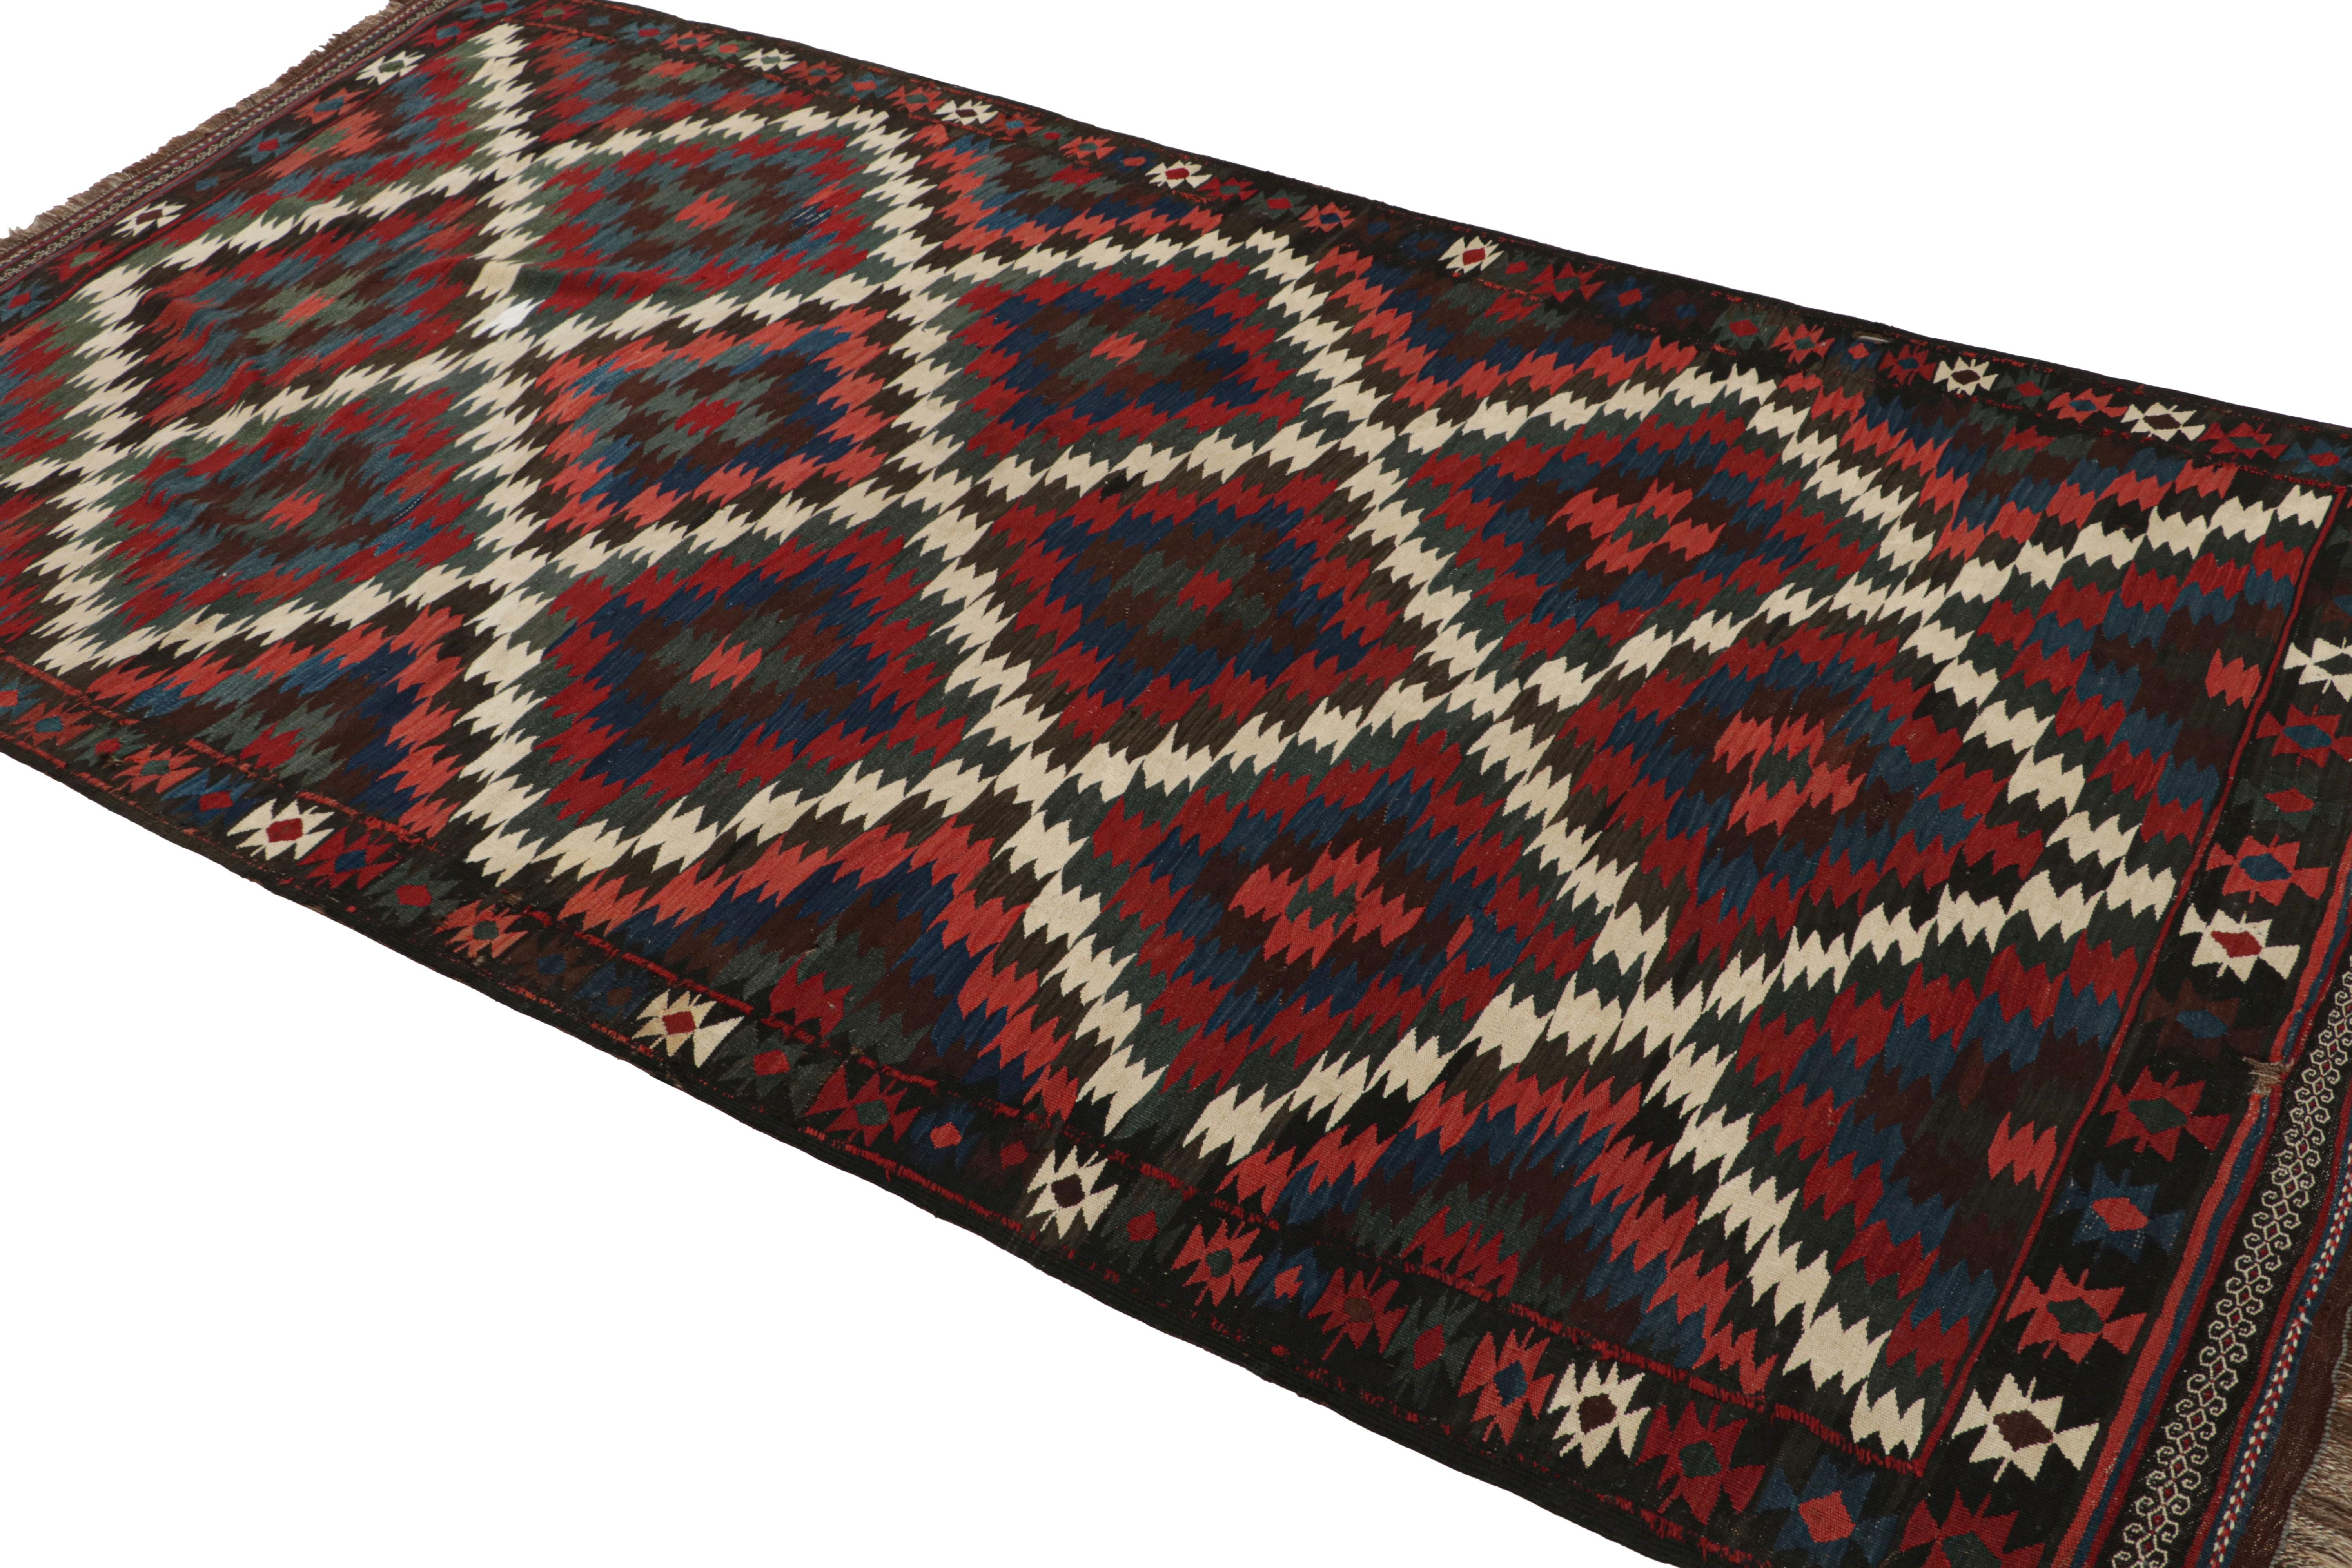 Handwoven in wool and originating from Turkey 5x10 circa 1950-1960, its polychromatic colorway enjoys a quite traditional emphasis of rich colors.  

On the Design: 

Connoisseurs may admire its colorway is a rich range of, namely deep reds, browns,